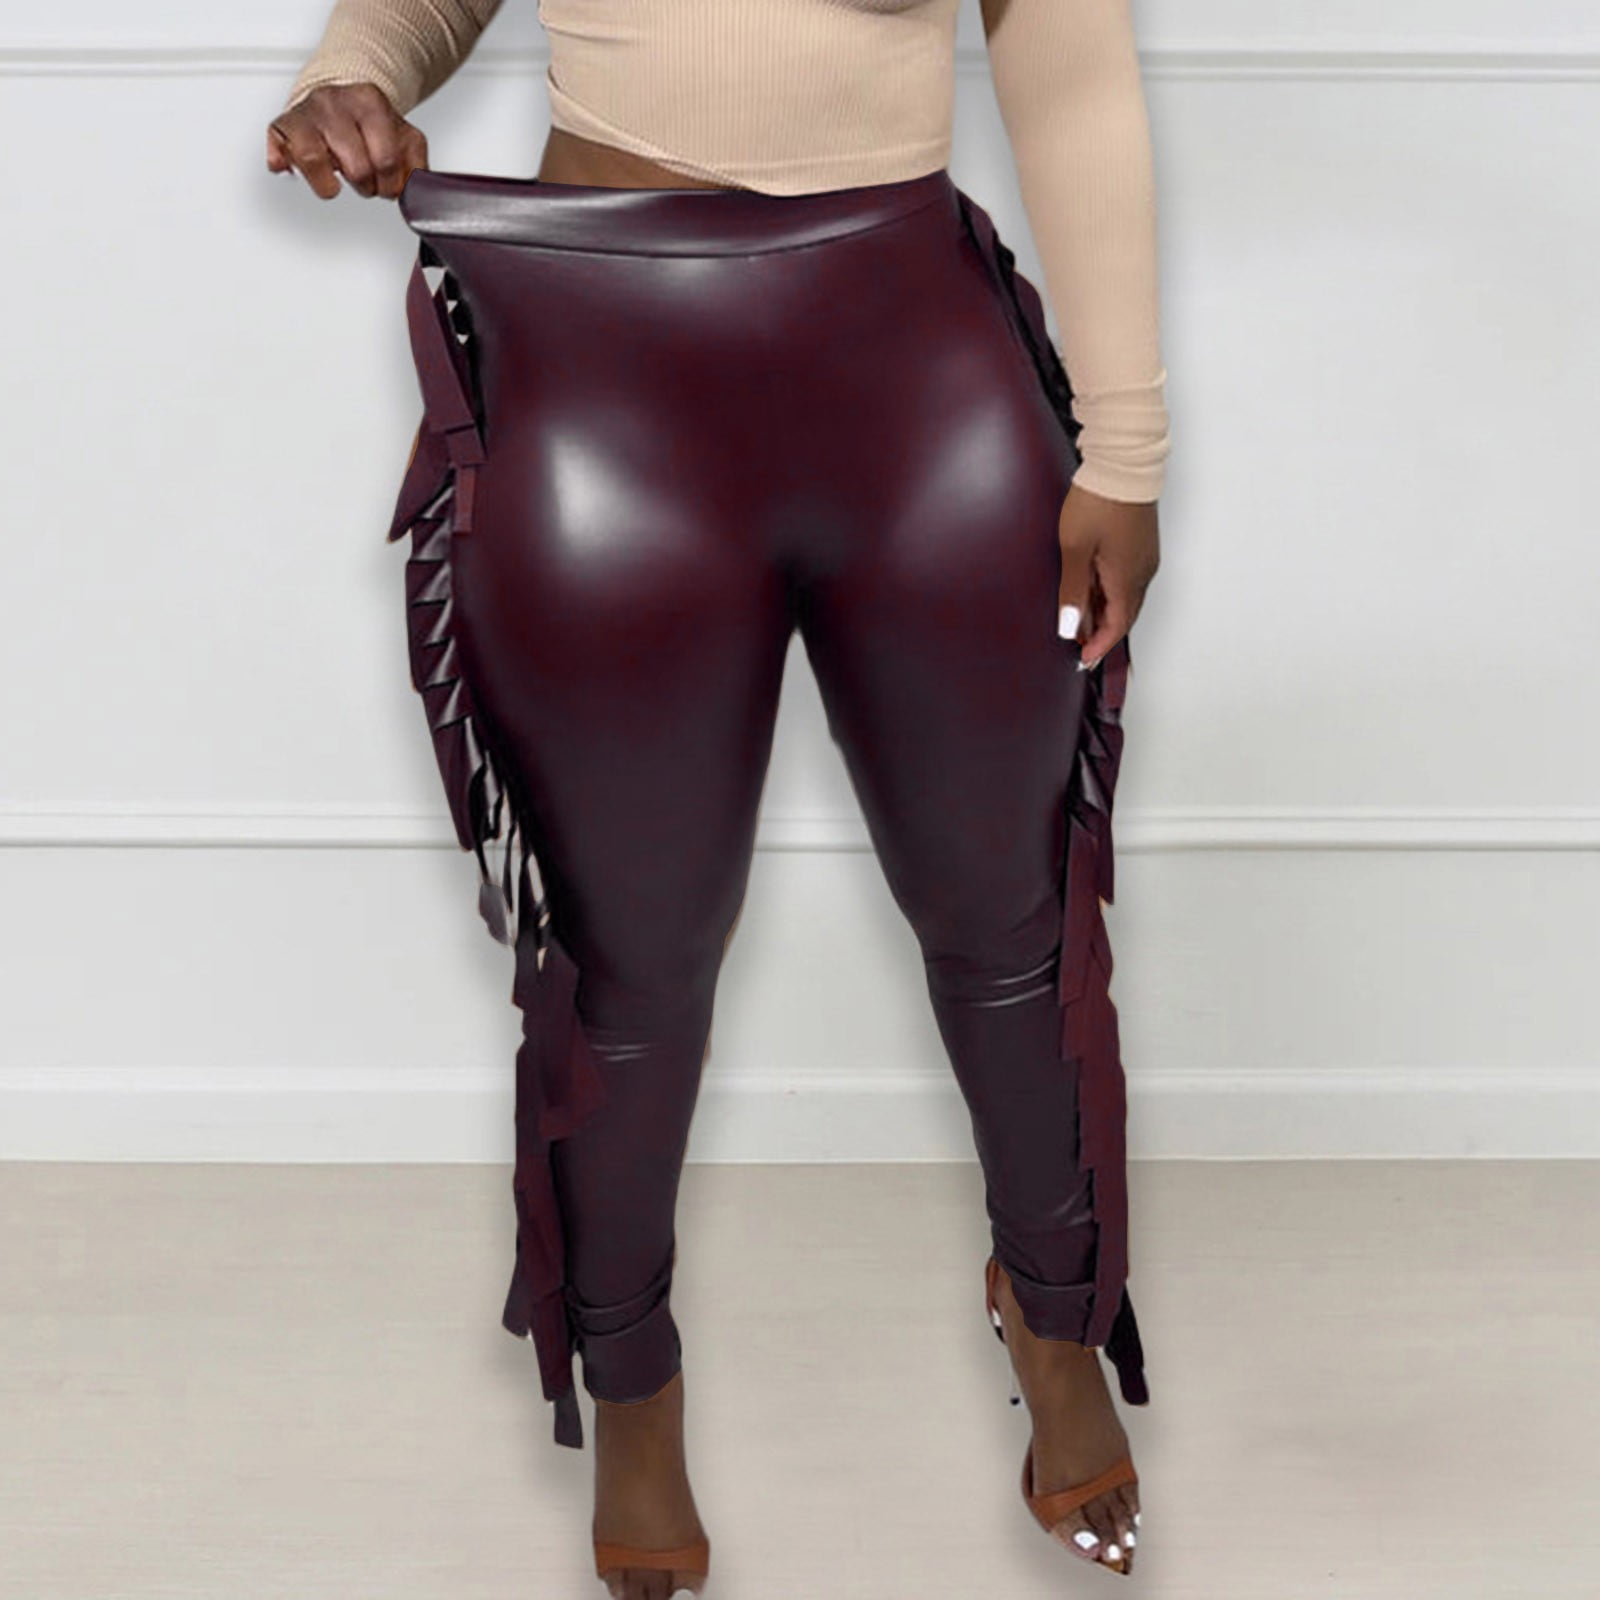 adviicd Leather Pants For Women Women's Flexible Club Leather Pants High  Waisted Disco Short Hot Pants Purple 3XL